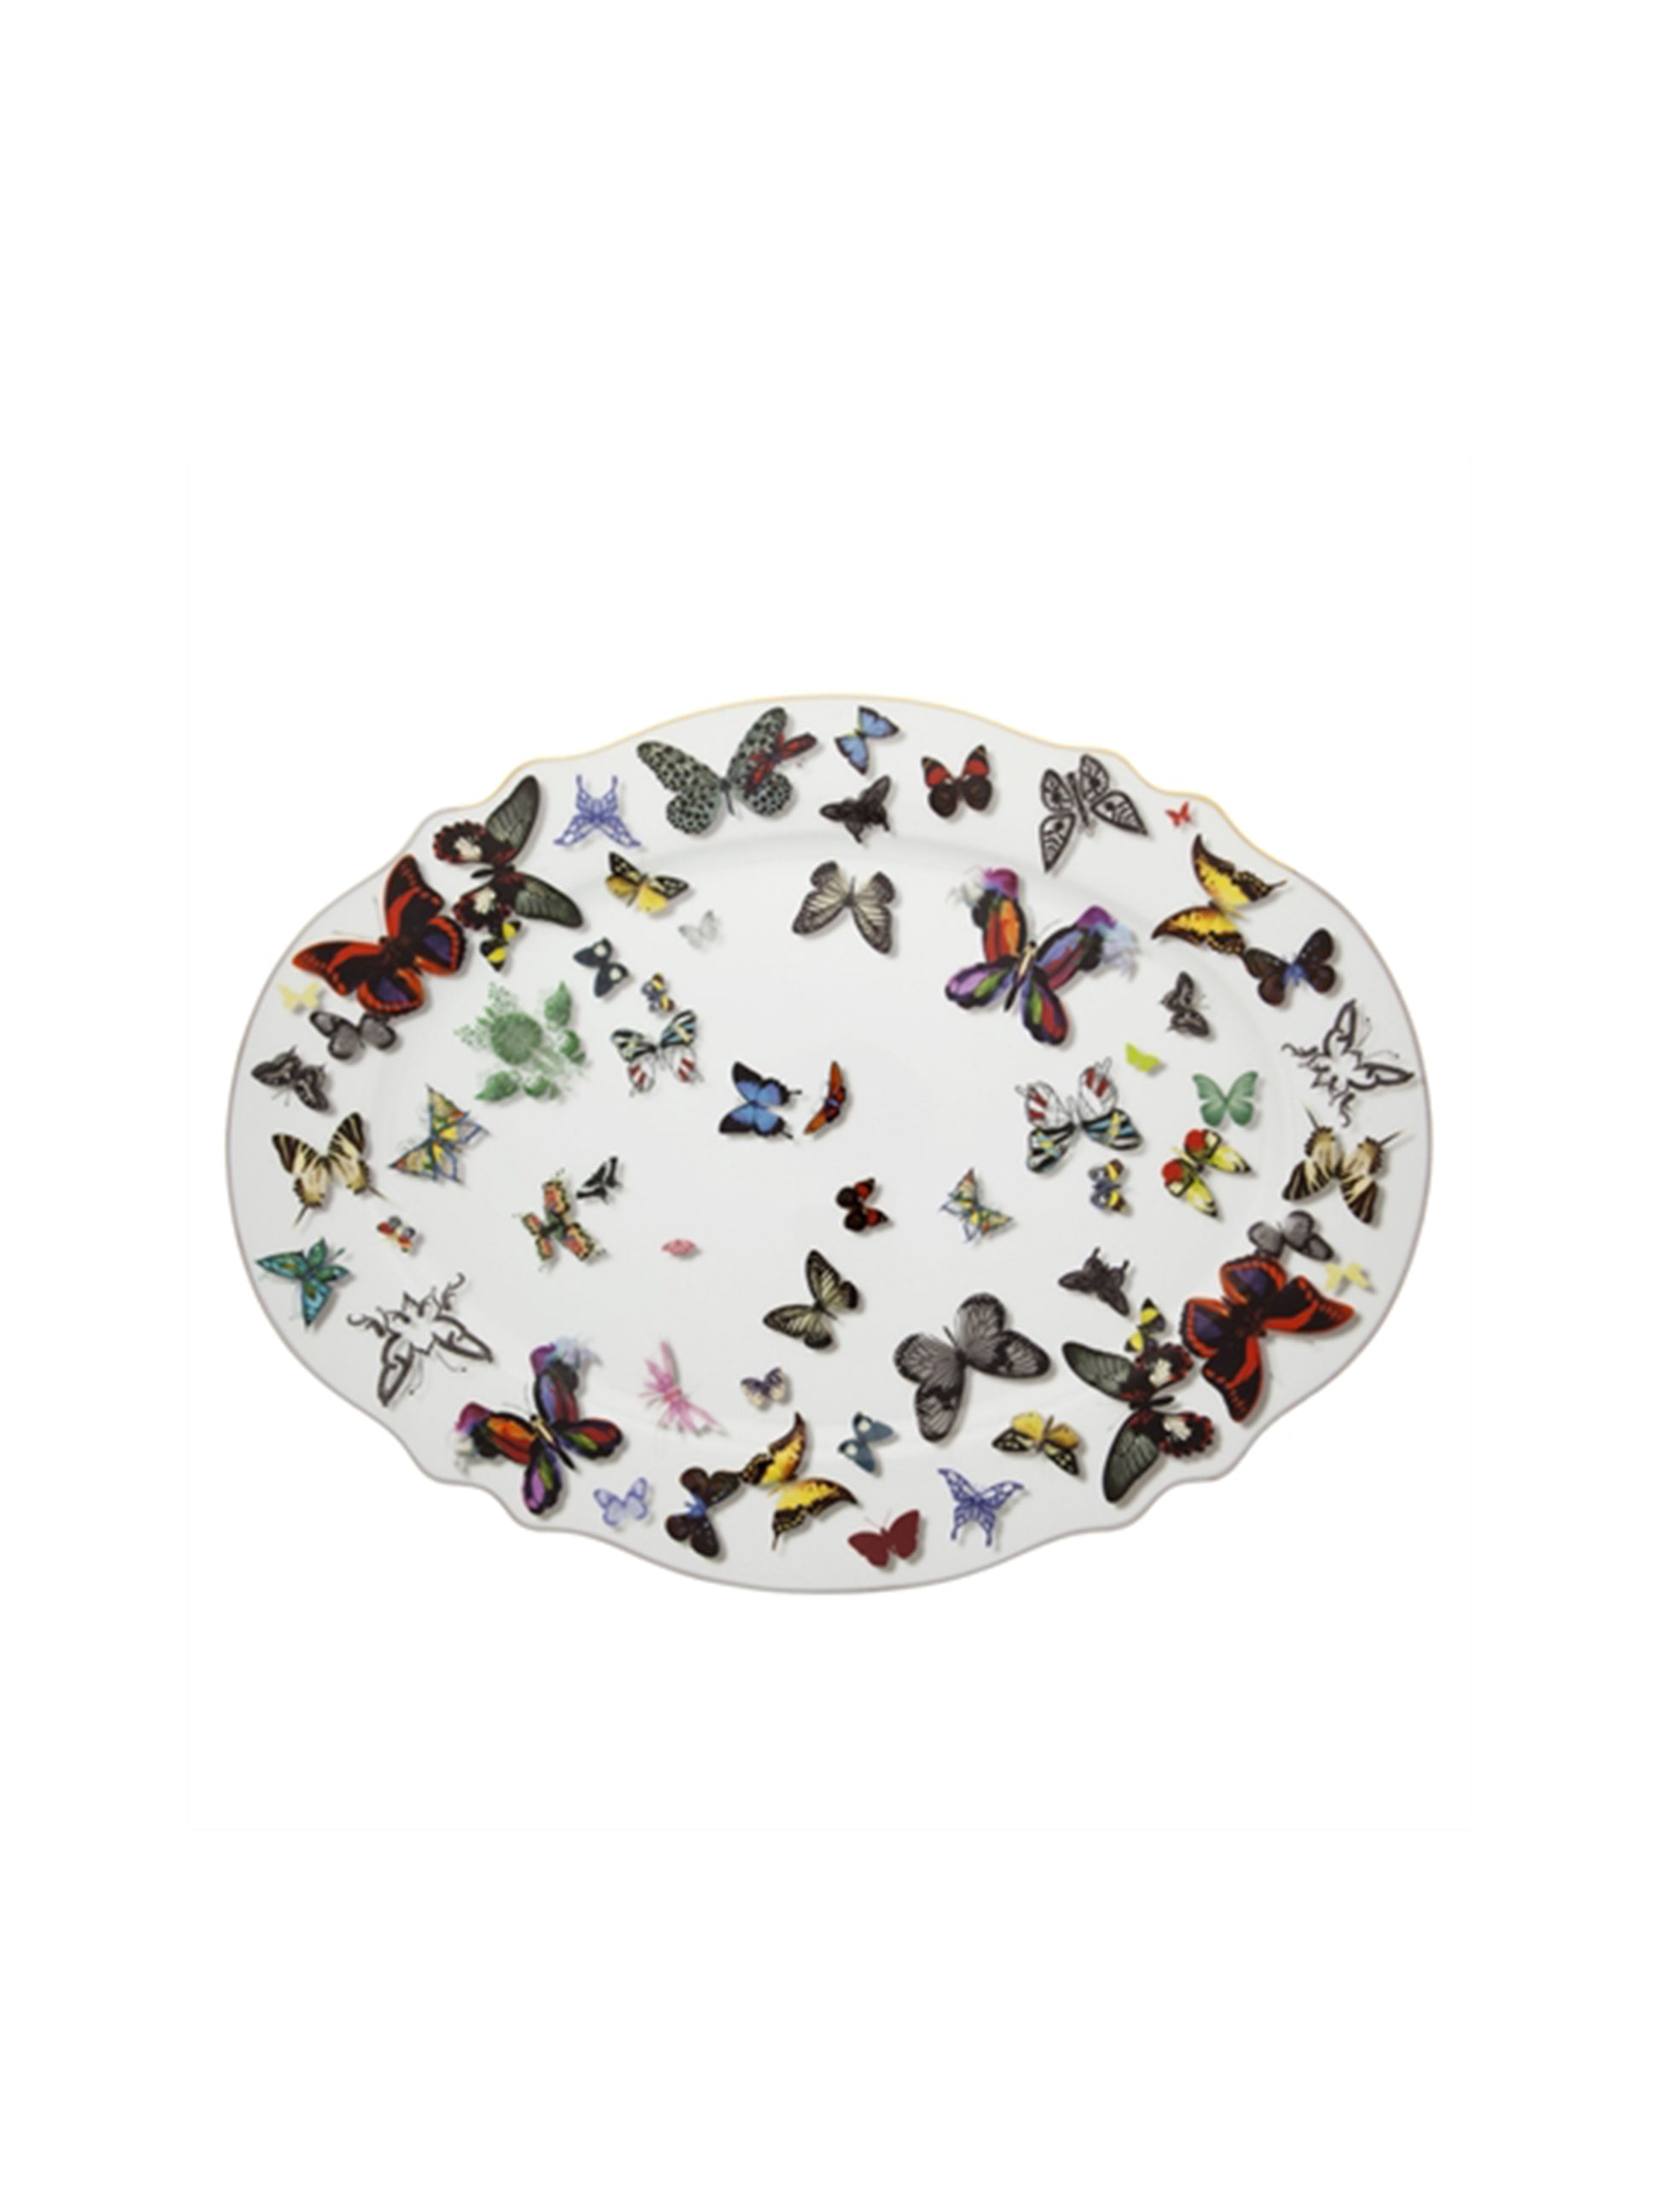 Christian Lacroix Butterfly Parade Large Platter Weston Table 